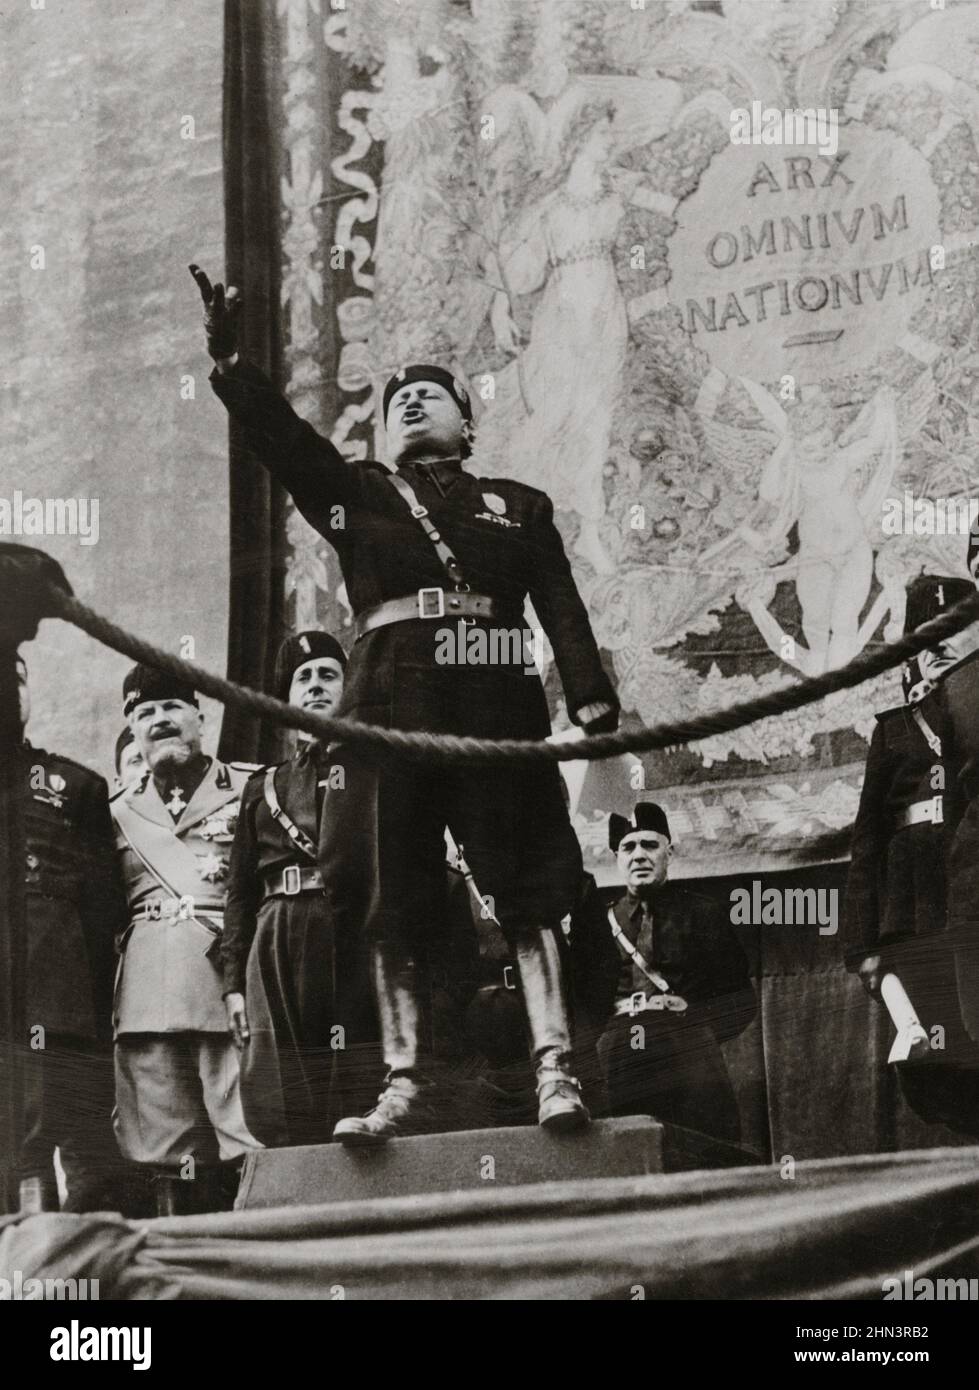 Vintage photo of Benito Mussolini. 1930-1940s Benito Amilcare Andrea Mussolini (1883–1945) was an Italian politician and journalist who founded and le Stock Photo